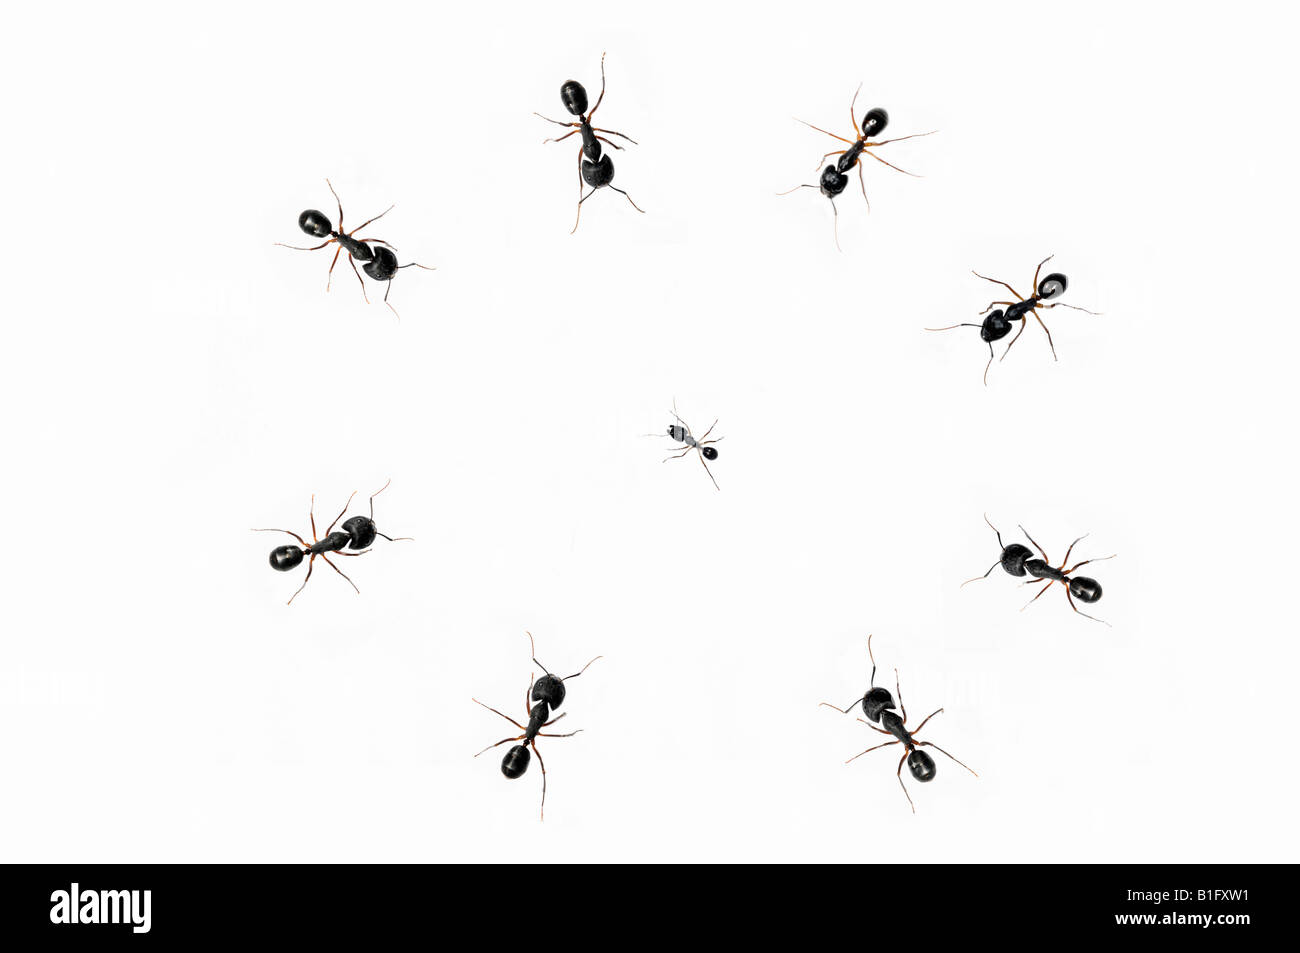 Large ants surrounding small ant Stock Photo